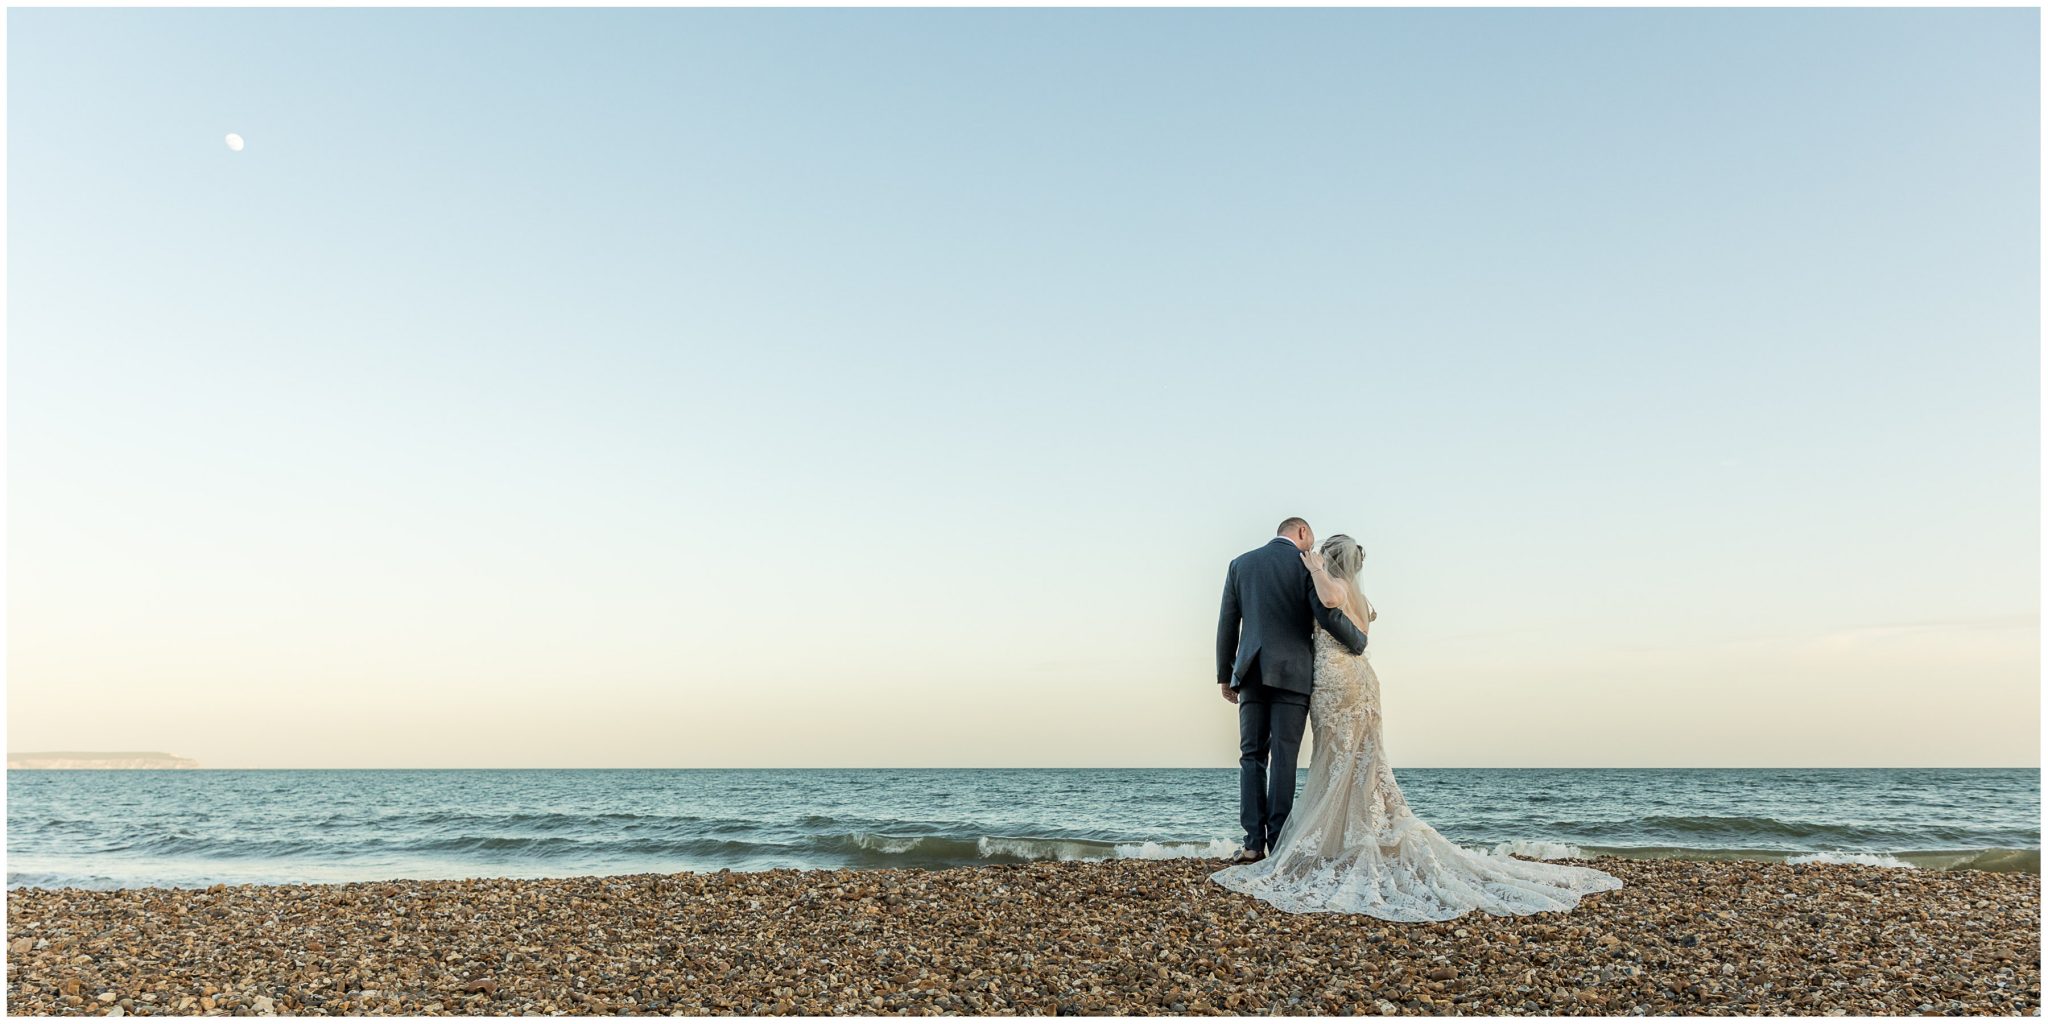 The couple look out over the blue seas on the Solent during their seaside beach photo shoot